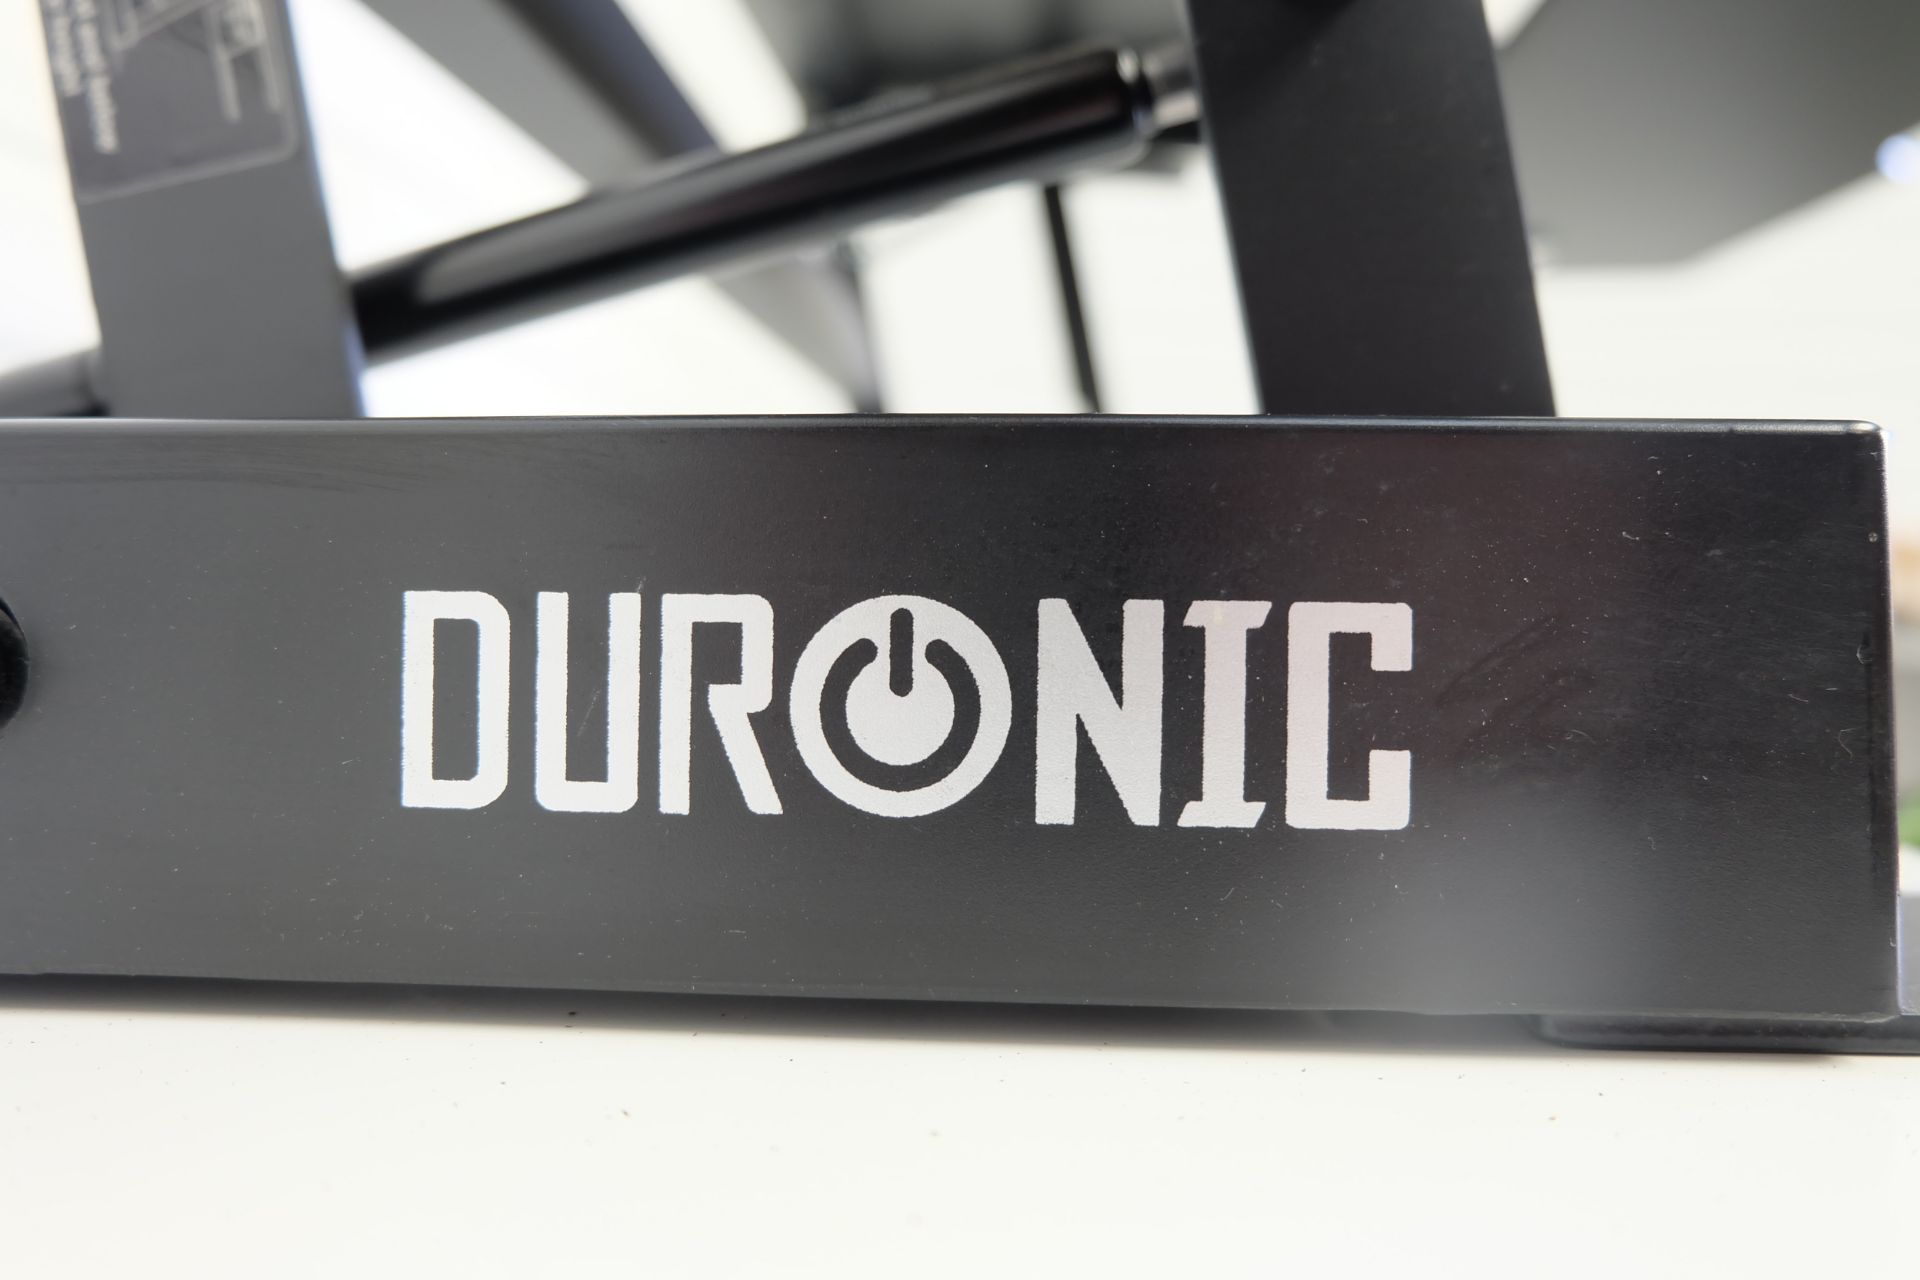 DURONIC Adjustable Standing Desk. Variable Heights. Keyboard Shelf. 36" Wide. 16.5" Max Height. - Image 3 of 4